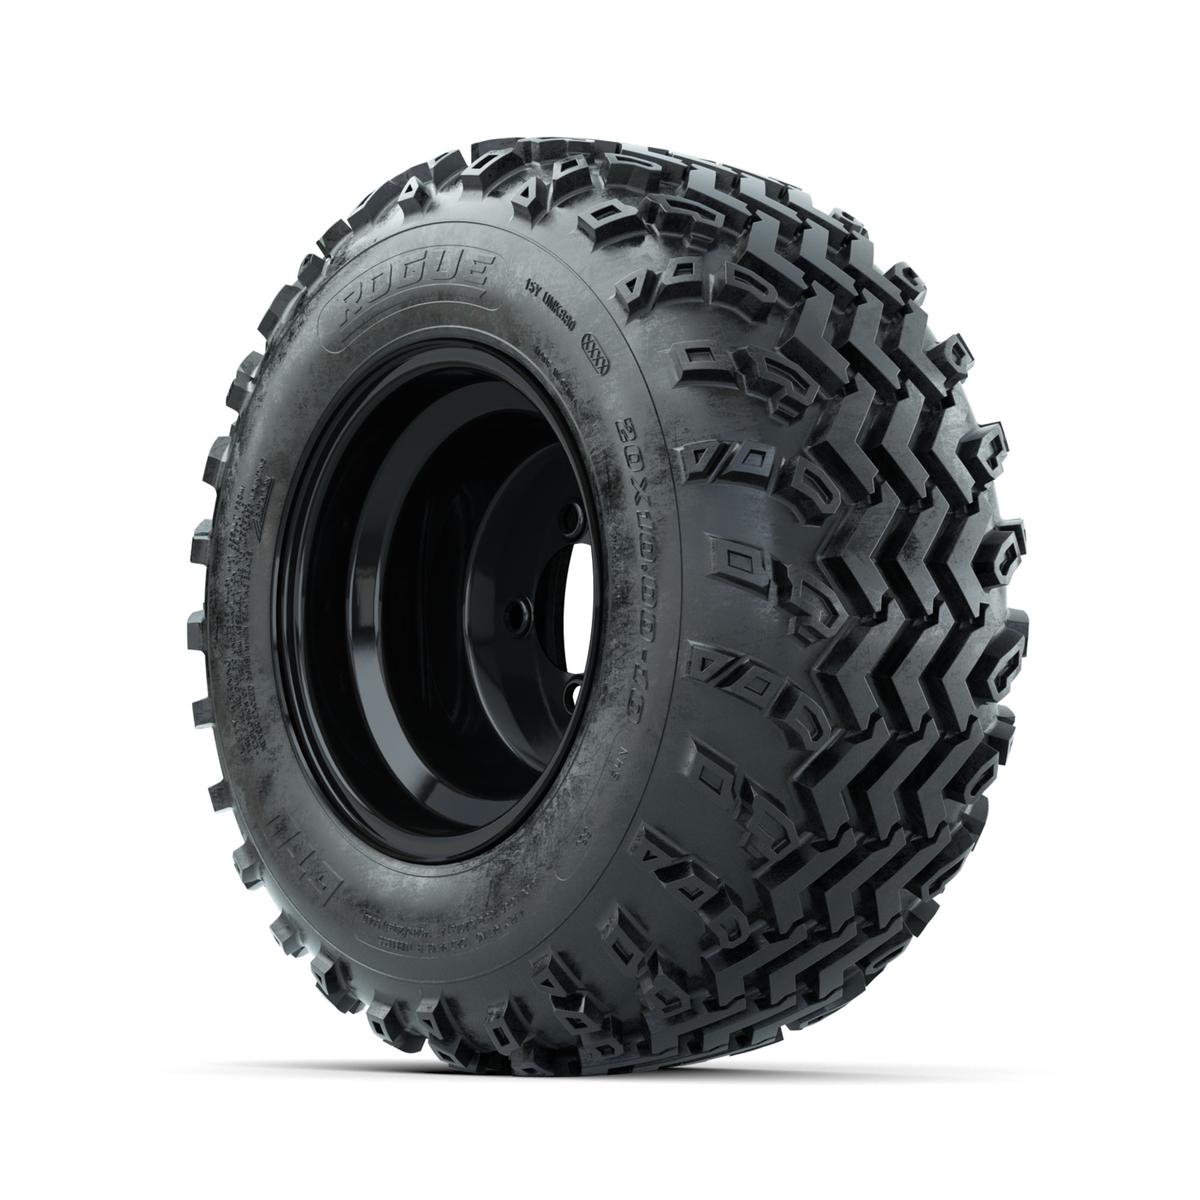 GTW Steel Black 10 in Wheels with 20x10.00-10 Rogue All Terrain Tires – Full Set